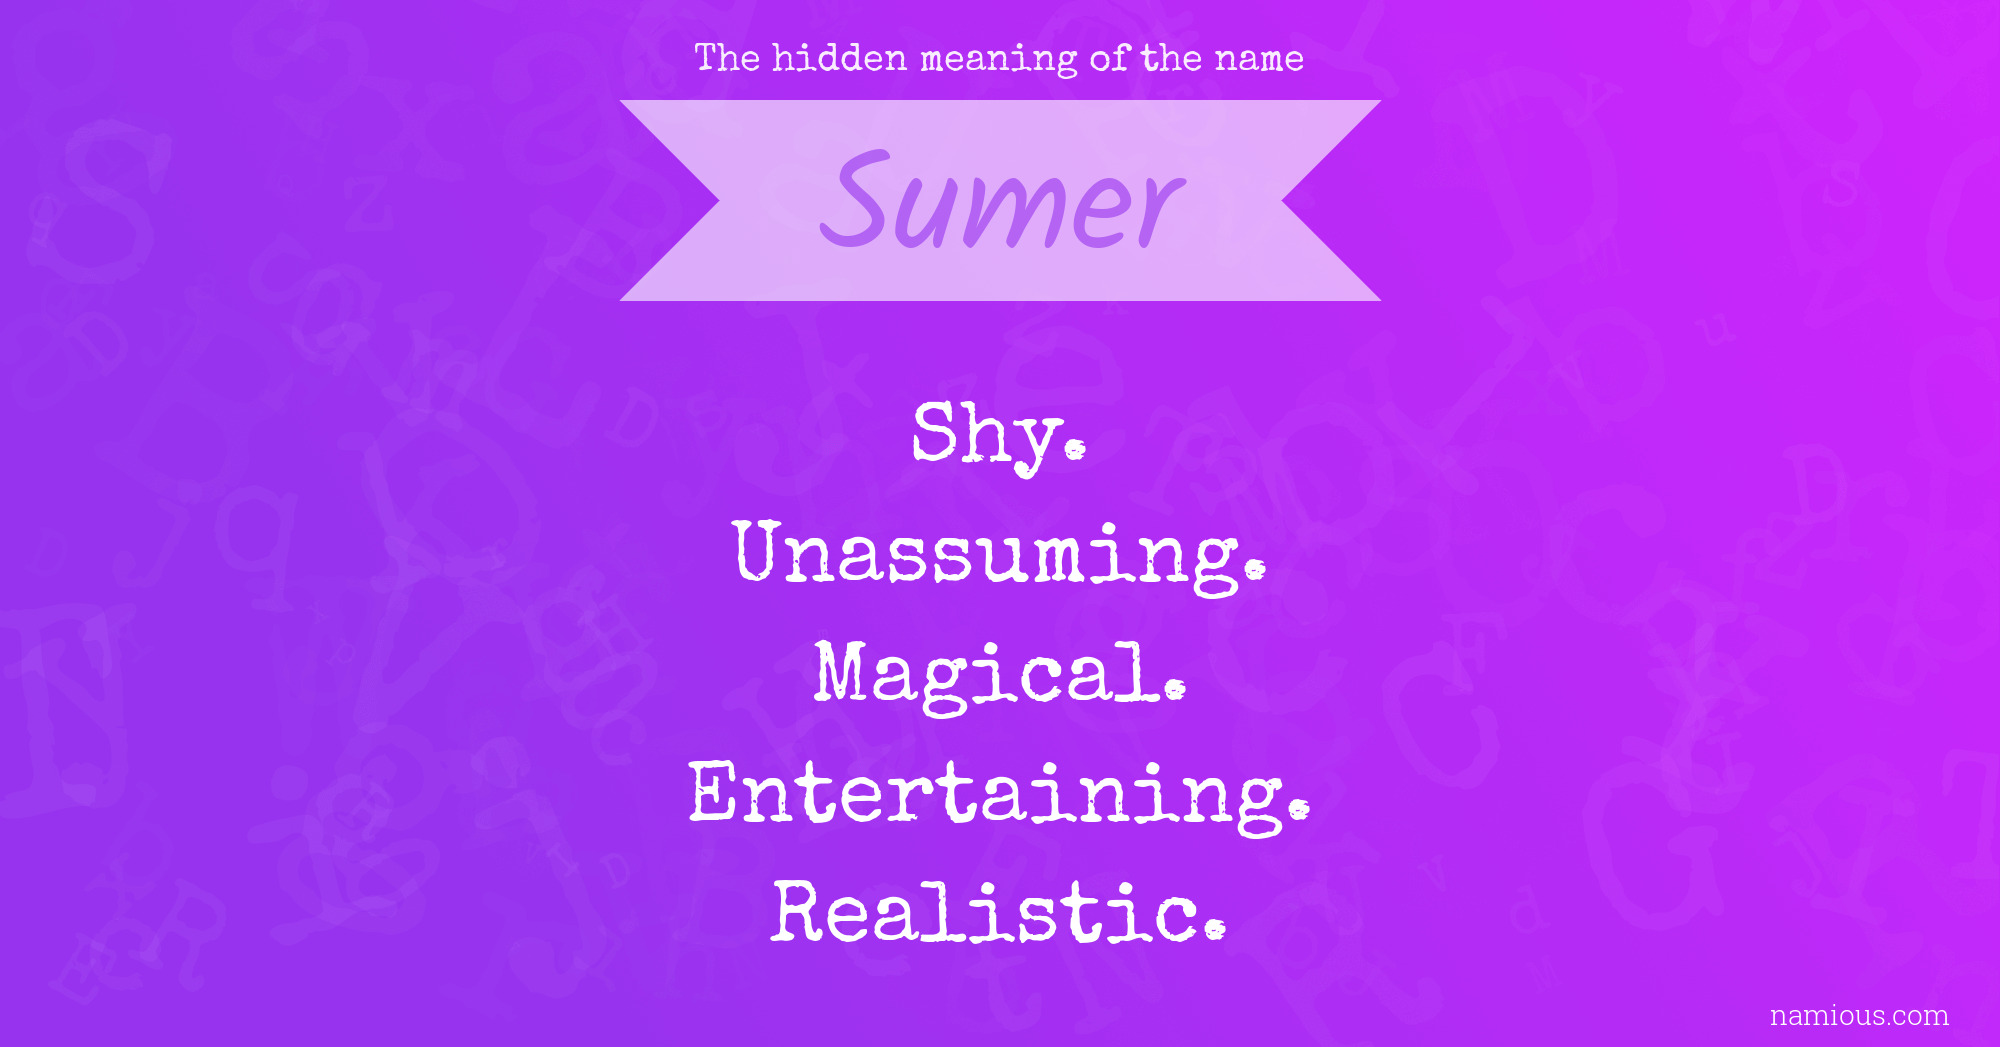 The hidden meaning of the name Sumer